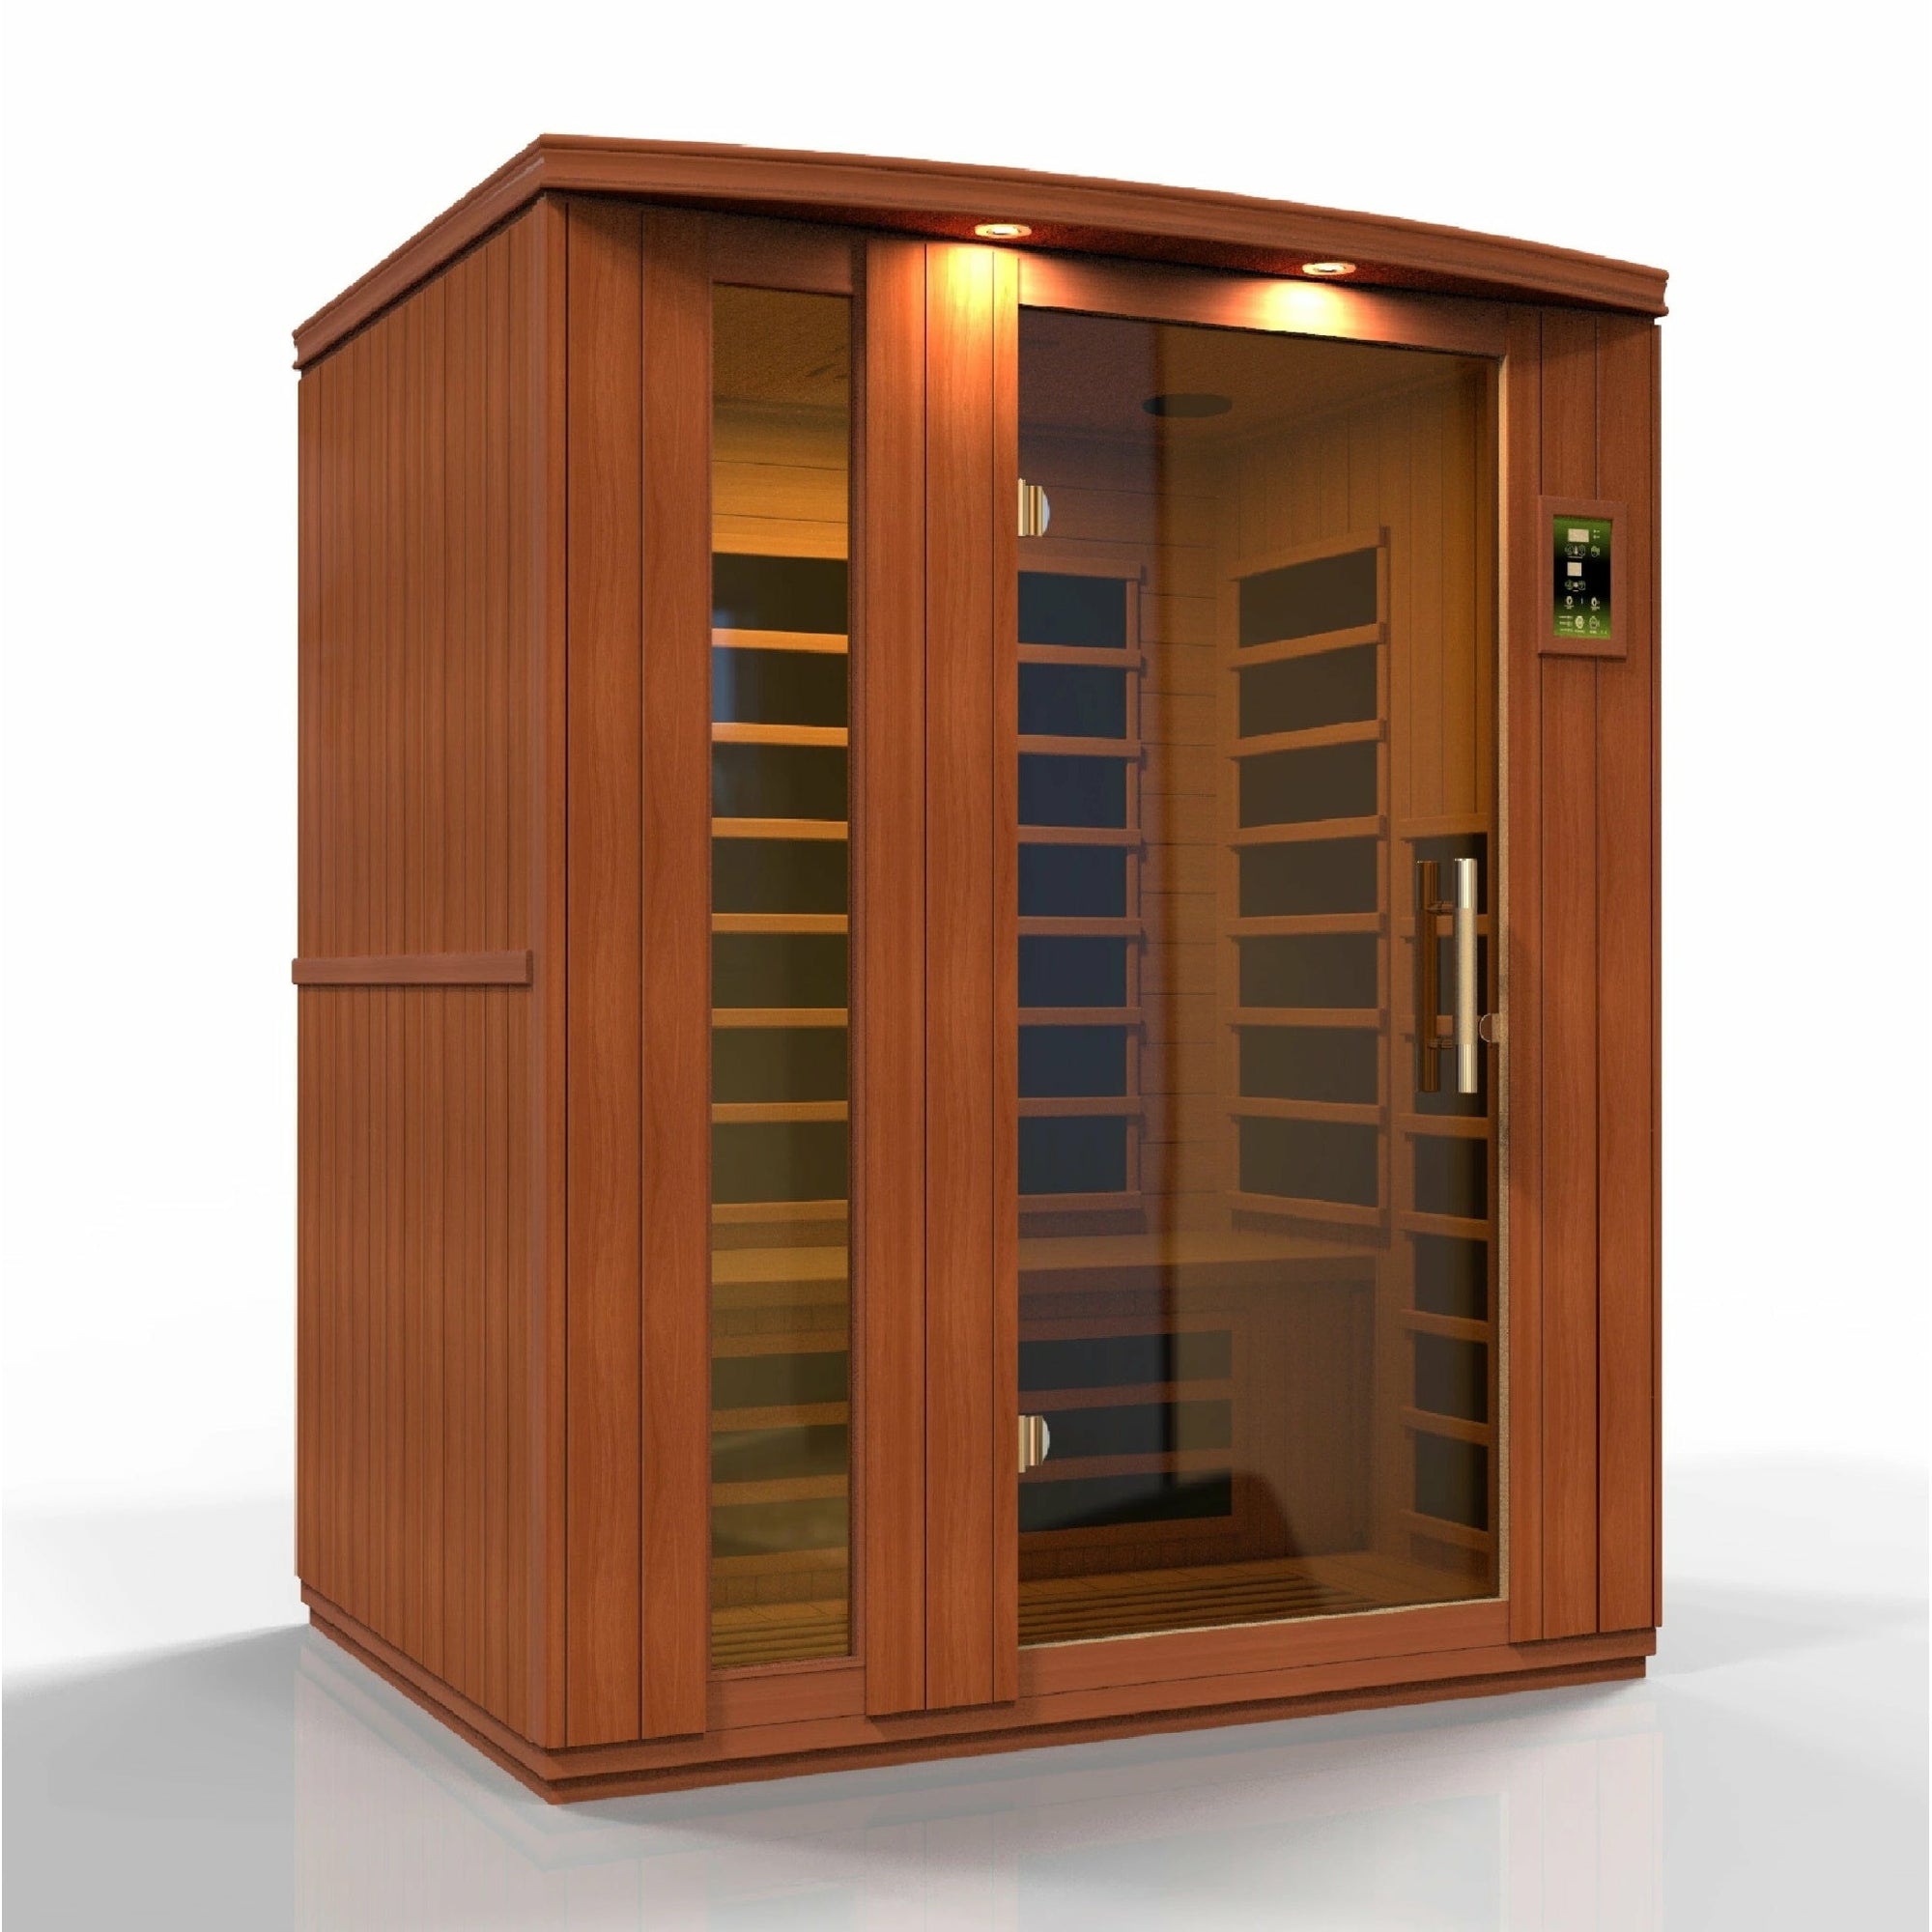 Dynamic Lugano 3-person Low EMF (Under 8MG) FAR Infrared Sauna (Canadian Hemlock) DYN-6336-02 - Carbon PureTech™ Ultra Low EMF Heat Emitters - Natural hemlock wood construction - Interior and exterior LED control panel - Tempered glass door - Interior reading/chromotherapy lighting system - Vital Hydrotherapy